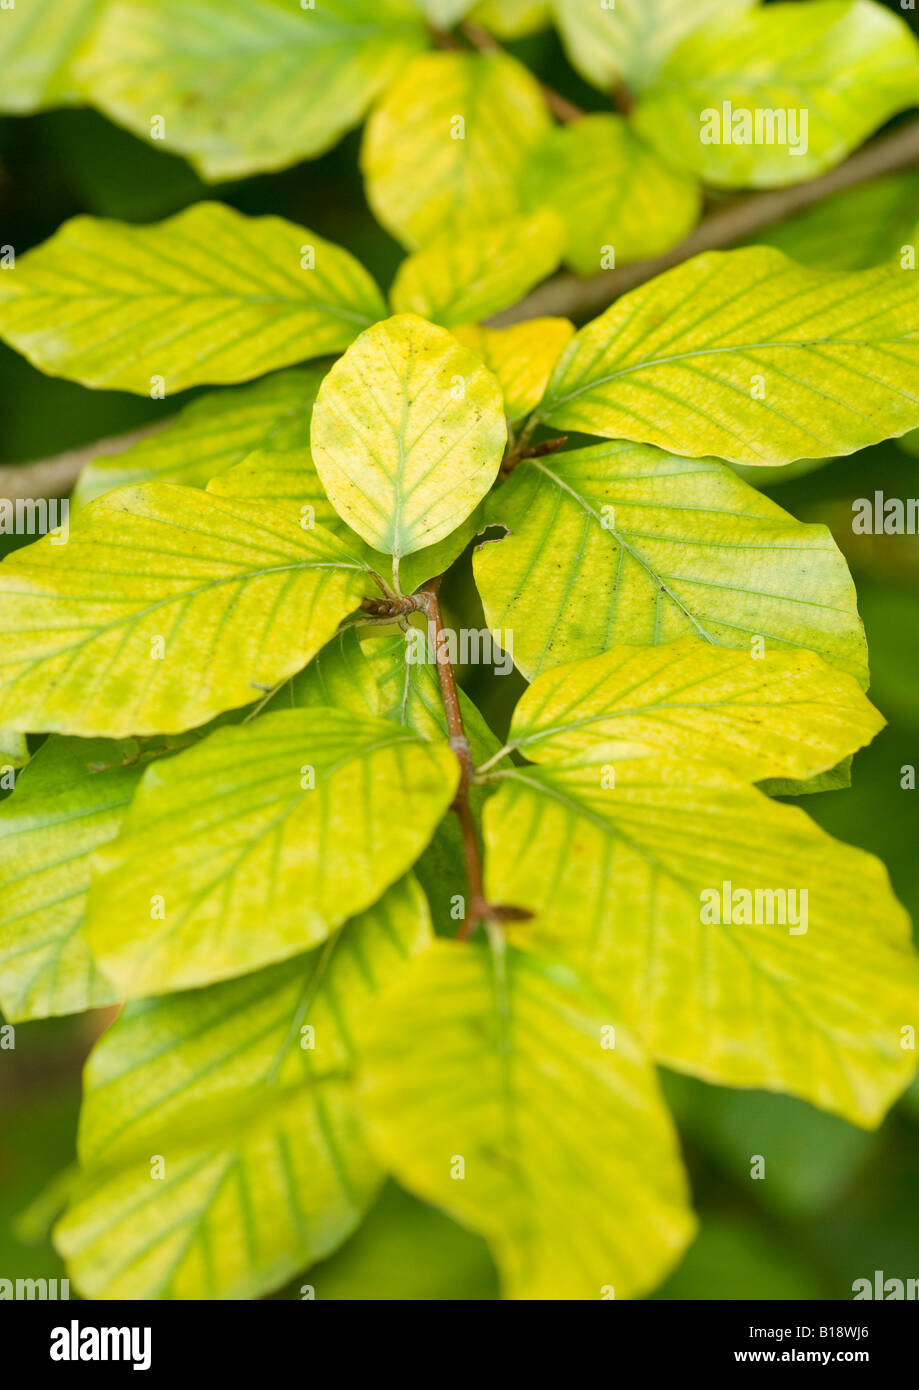 Iron and manganese deficiency of leaves Stock Photo